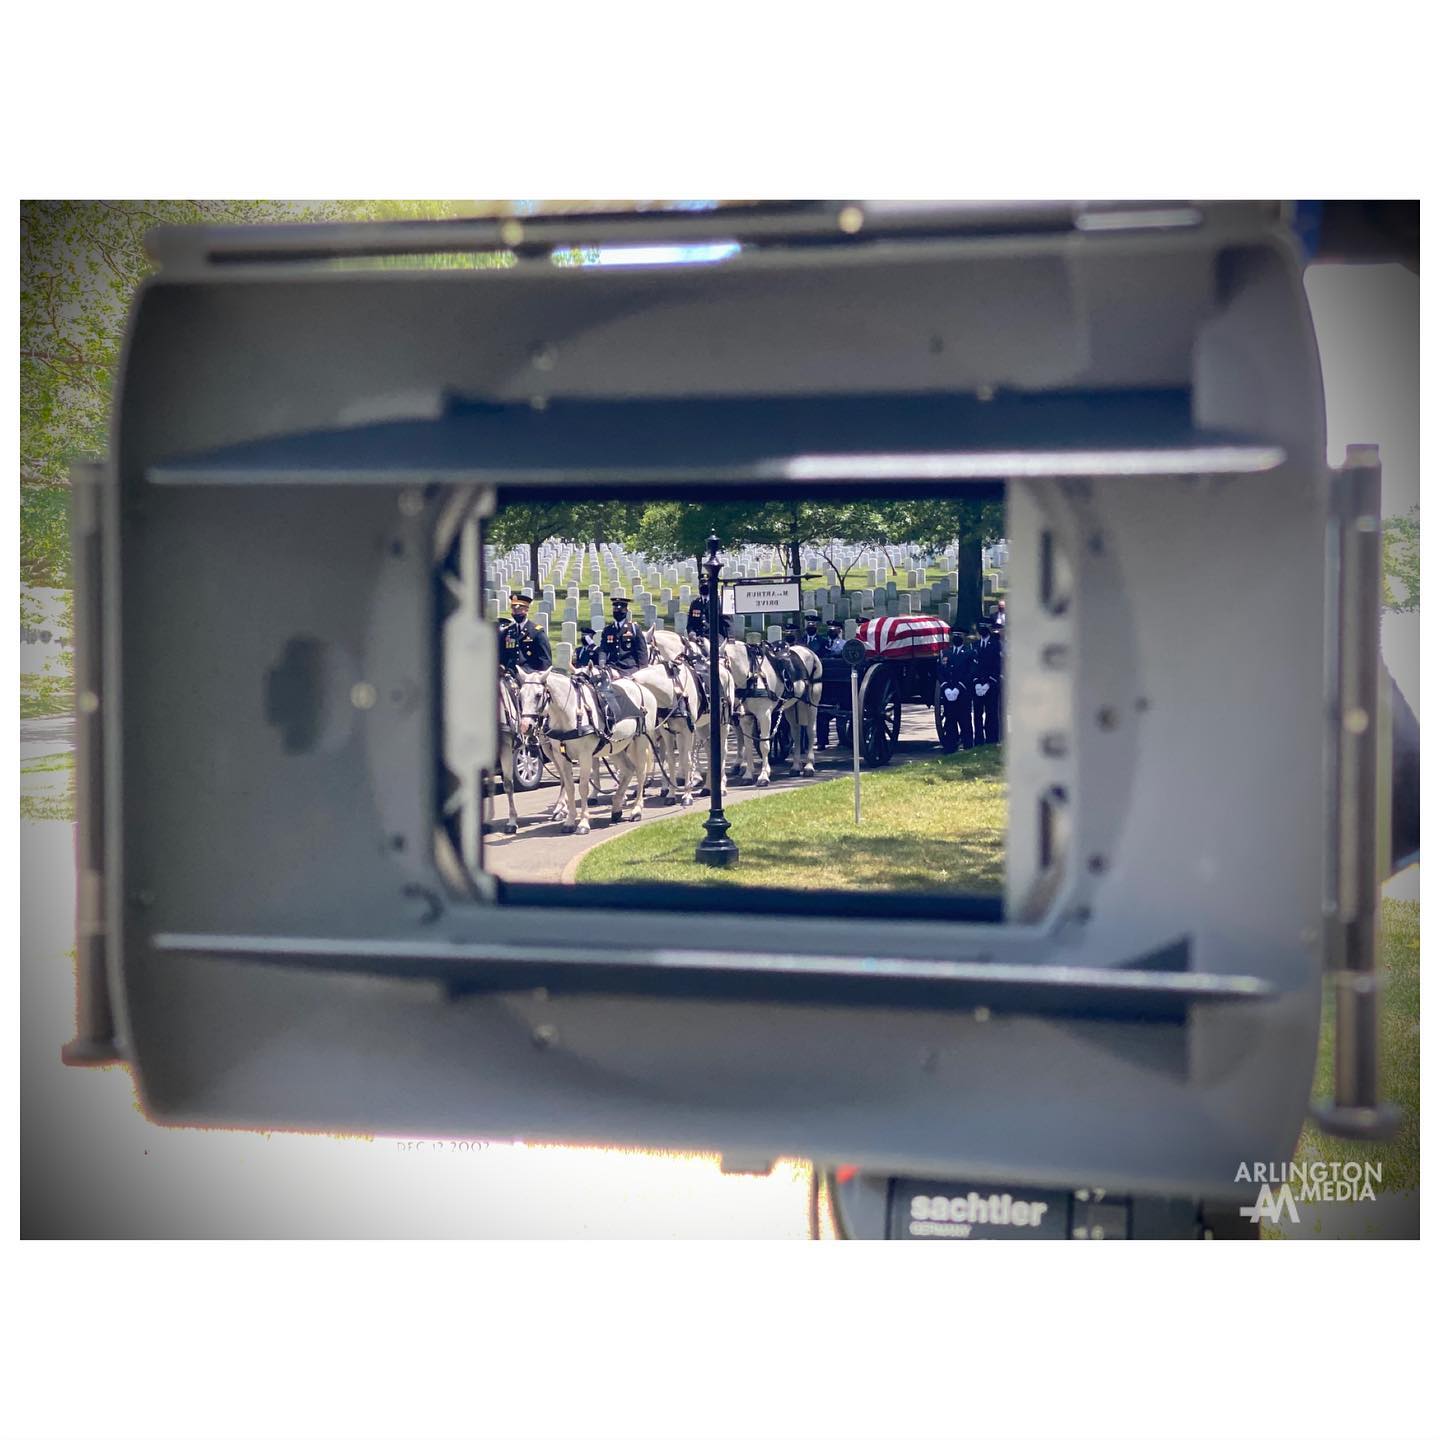 With the @usairforce @usafhonorguard and @usarmyoldguard caisson team getting ready for a transfer at Arnold Drive, as seen reflected through one of our lenses. This is one of the four services Arlington Media covered for families today. 

#Arlington⠀
#ArlingtonMedia⠀
#ArlingtonCemetery⠀
#ArlingtonNationalCemetery⠀